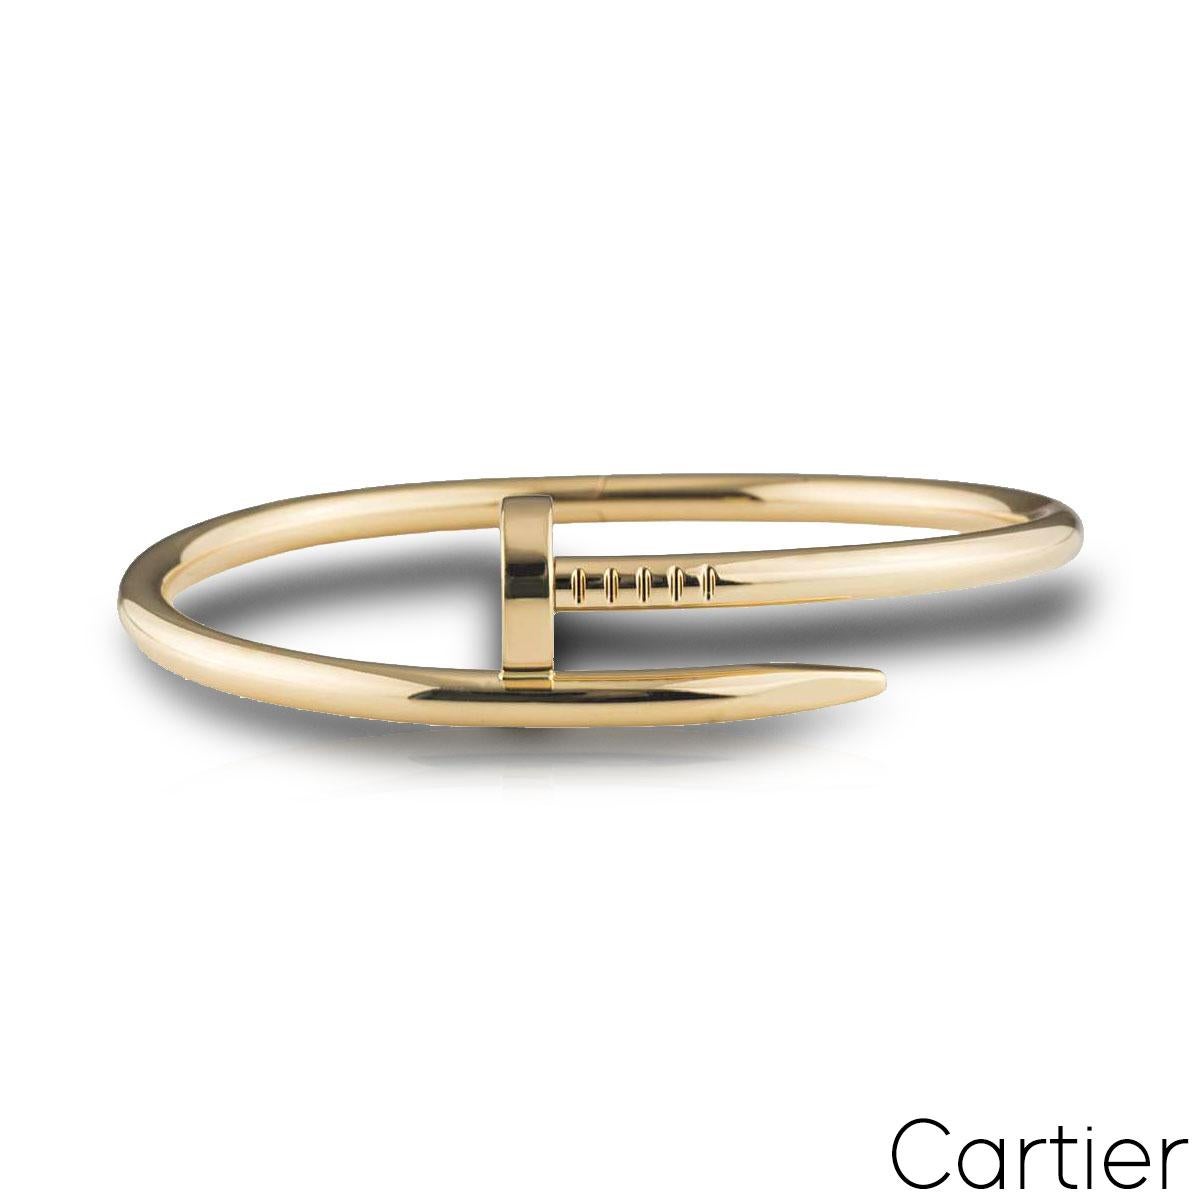 A stylish 18k yellow gold bracelet by Cartier from the Juste Un Clou collection. The bracelet is wrapped around with a nail head at one end and a nail end at the other. The bracelet is a size 17 with the old style clasp fitting and has a gross